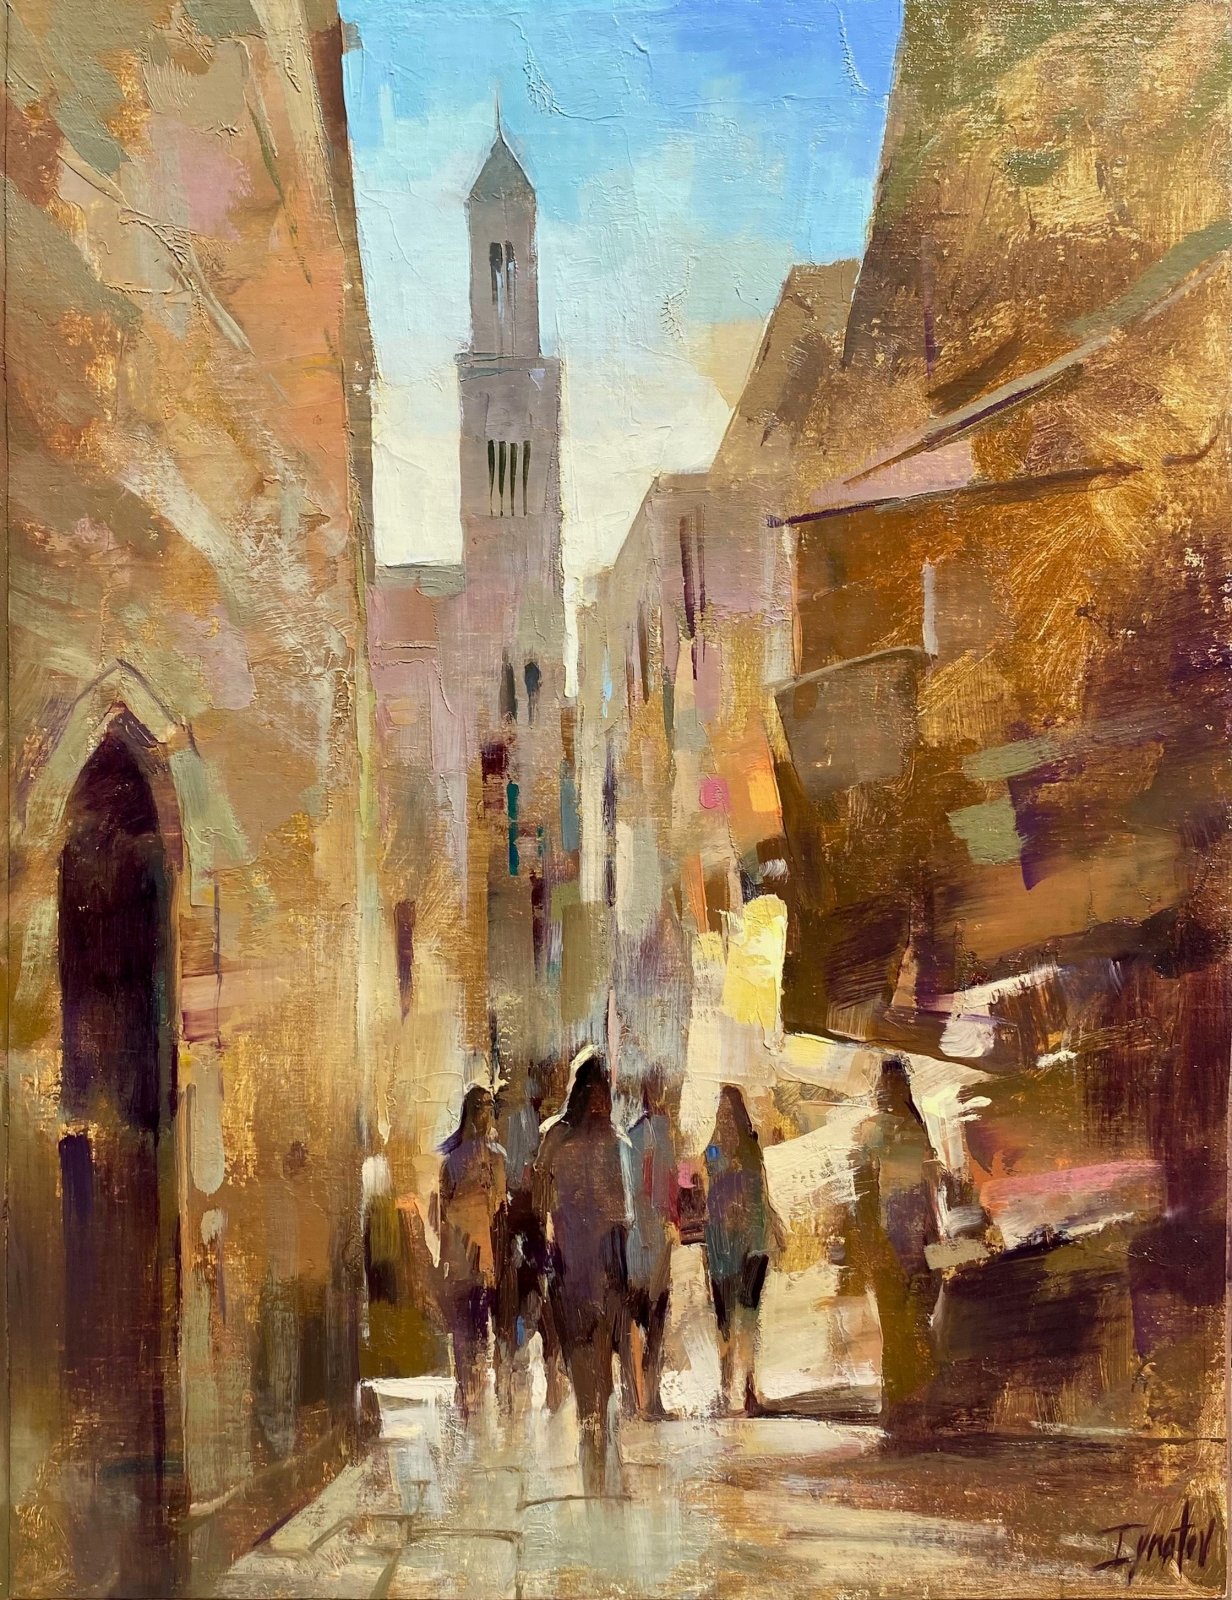 Bari Alley, Italy by Ignat Ignatov at LePrince Galleries